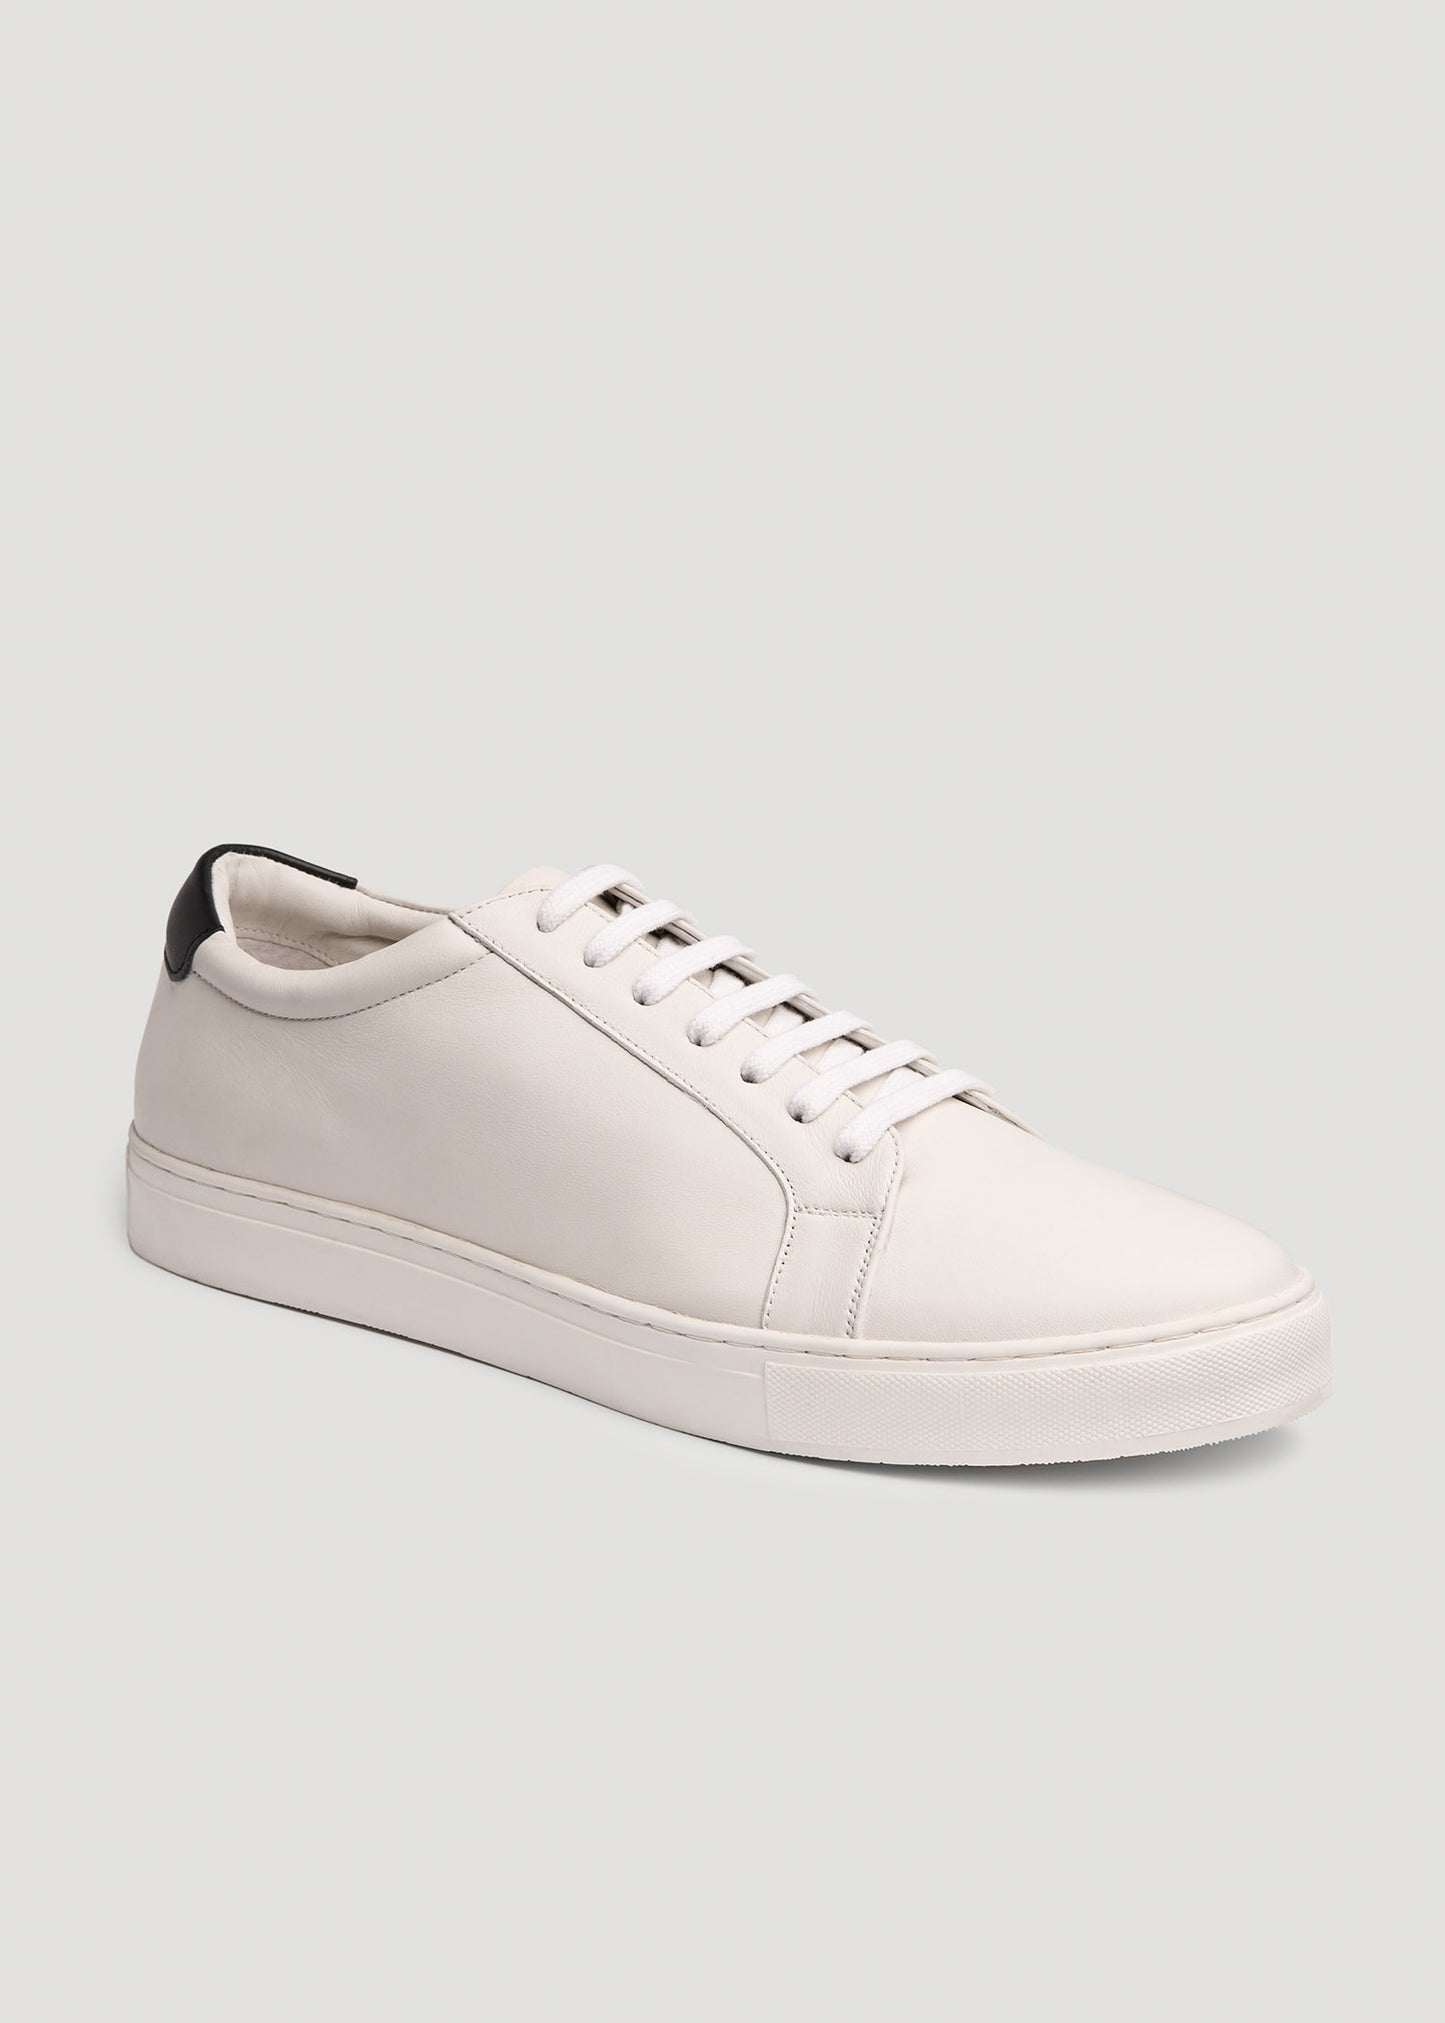 Side view of American Tall's Cupsole Tennis Sneakers for Tall Men in White.